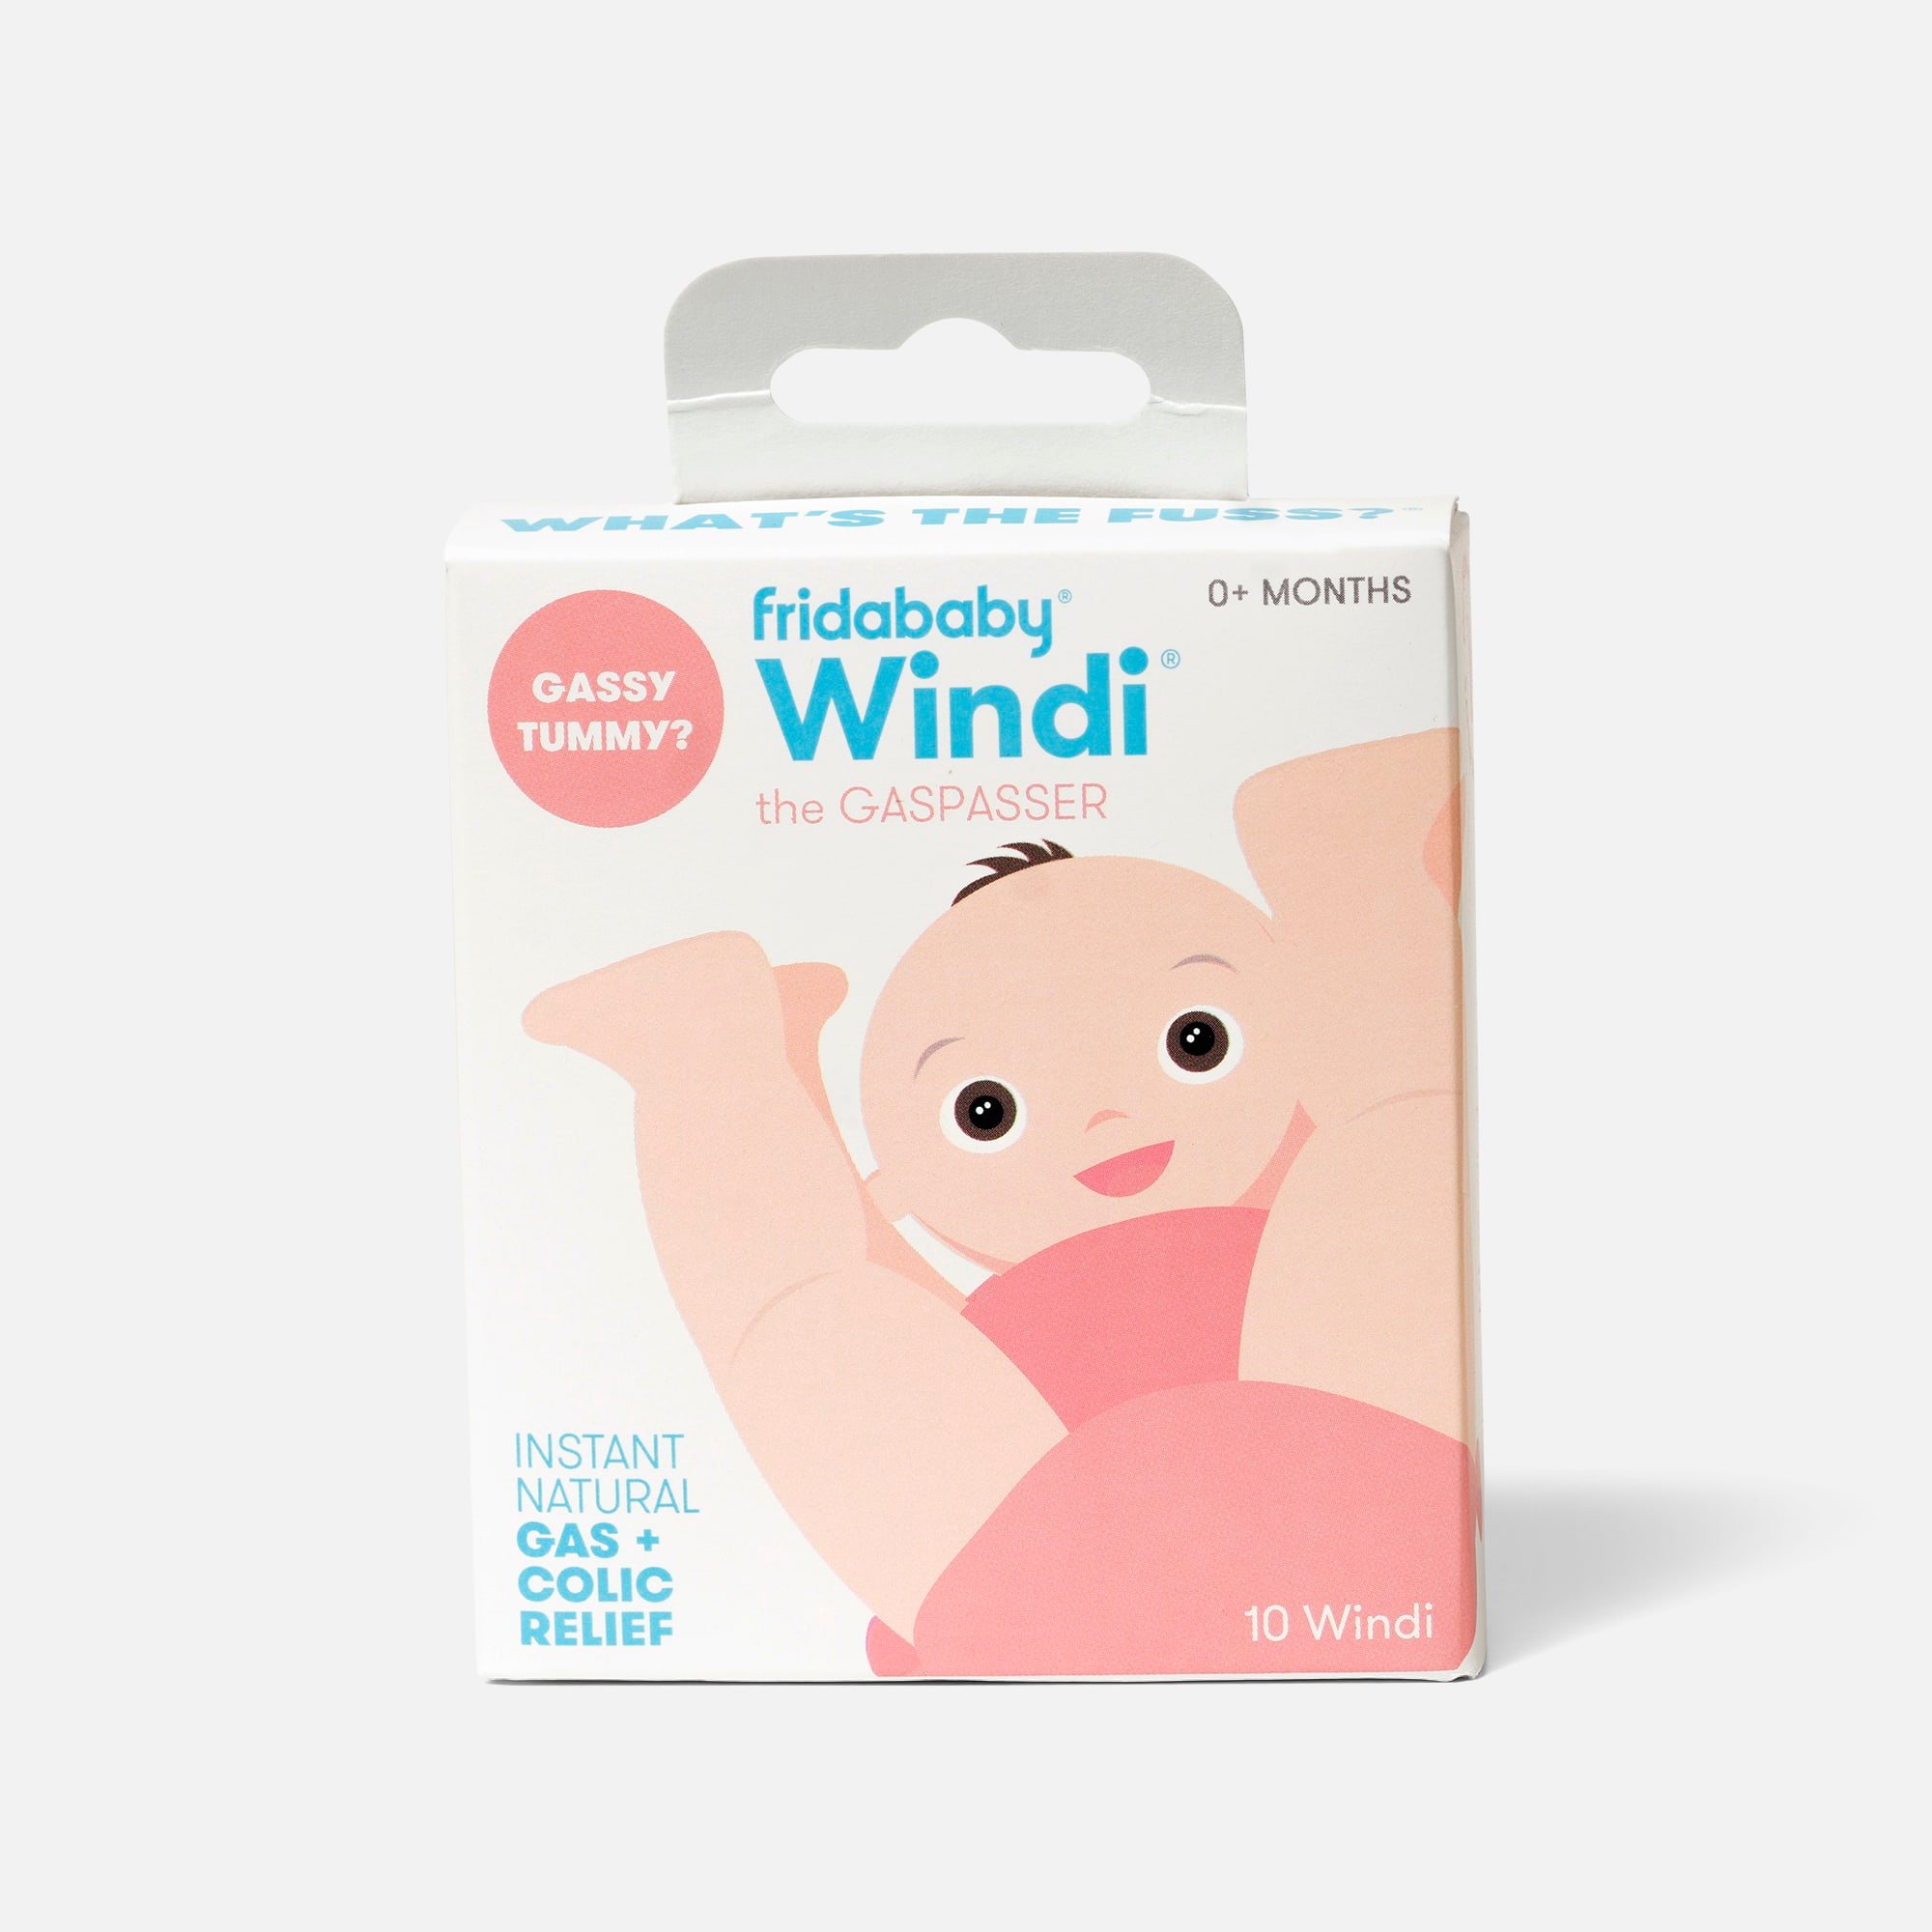 Frida Baby Windi Gas and Colic Reliever For Babies, 10 Count